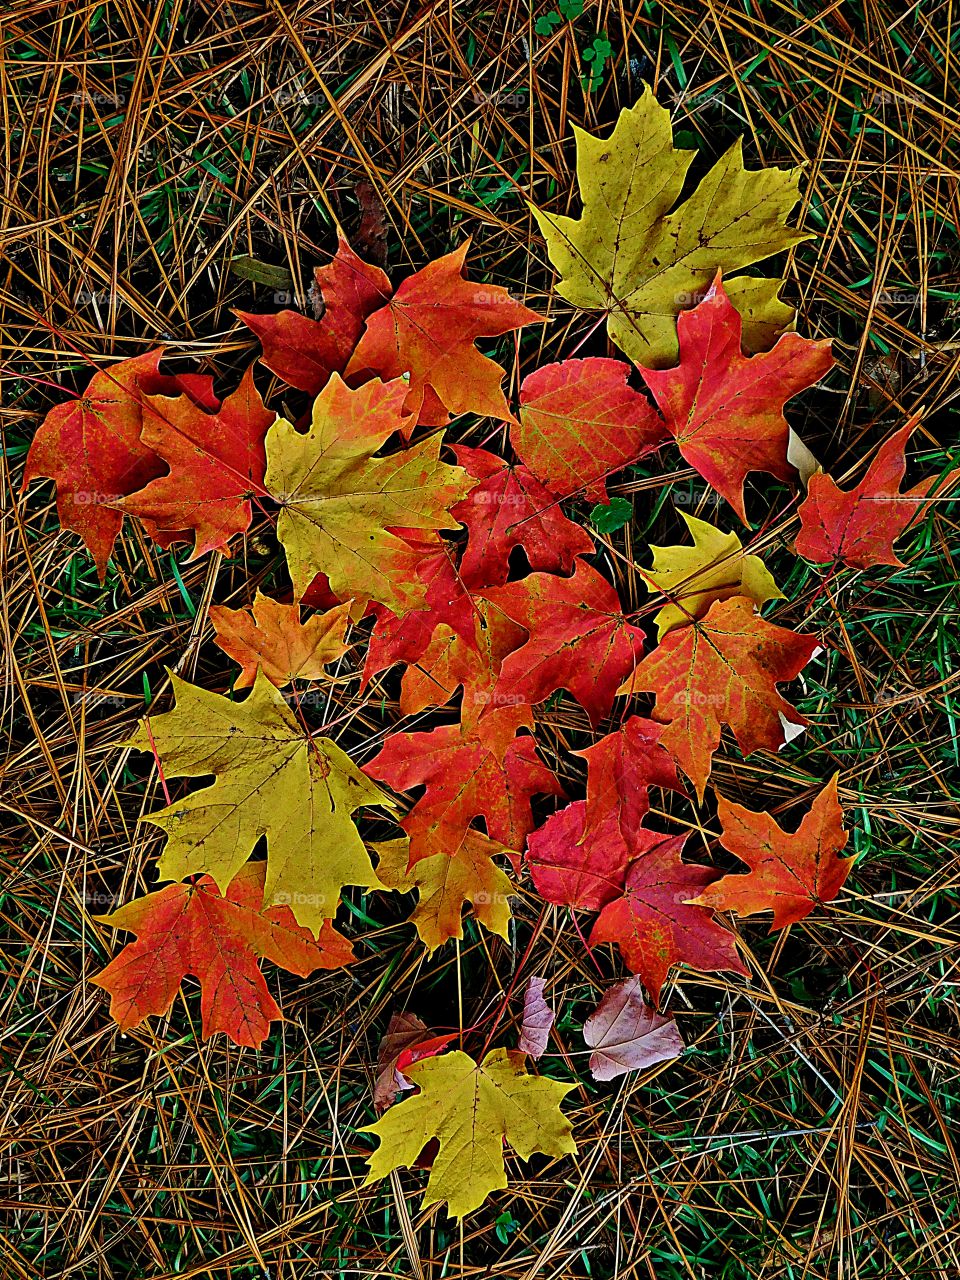 First signs of autumn - A telltale sign that fall has arrived is when you see colorful leaves laying on a bed of fallen pine needles